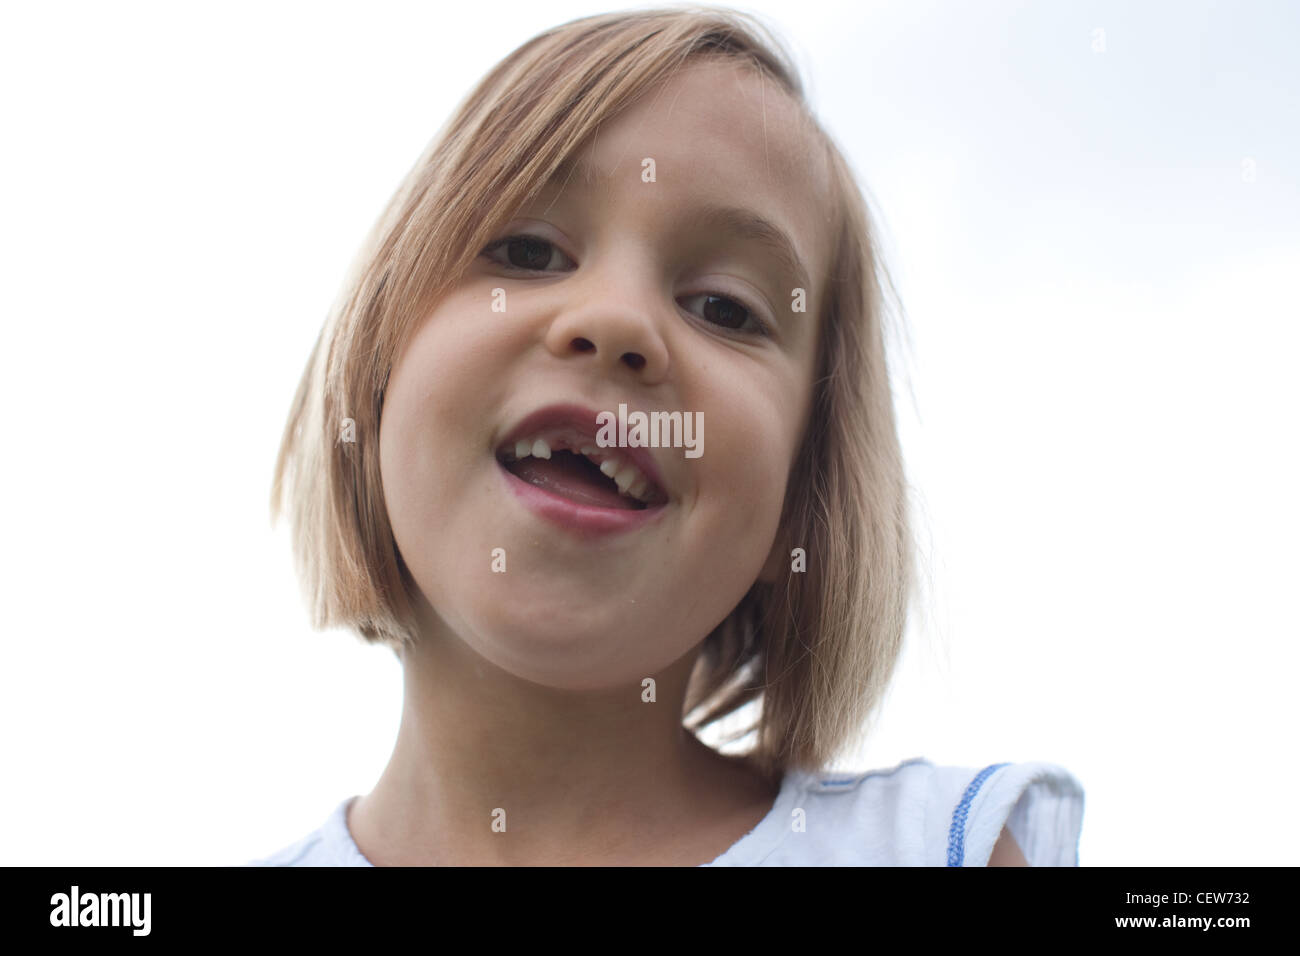 Six year old smiling with large gap, missing front teeth, sky in background. Stock Photo